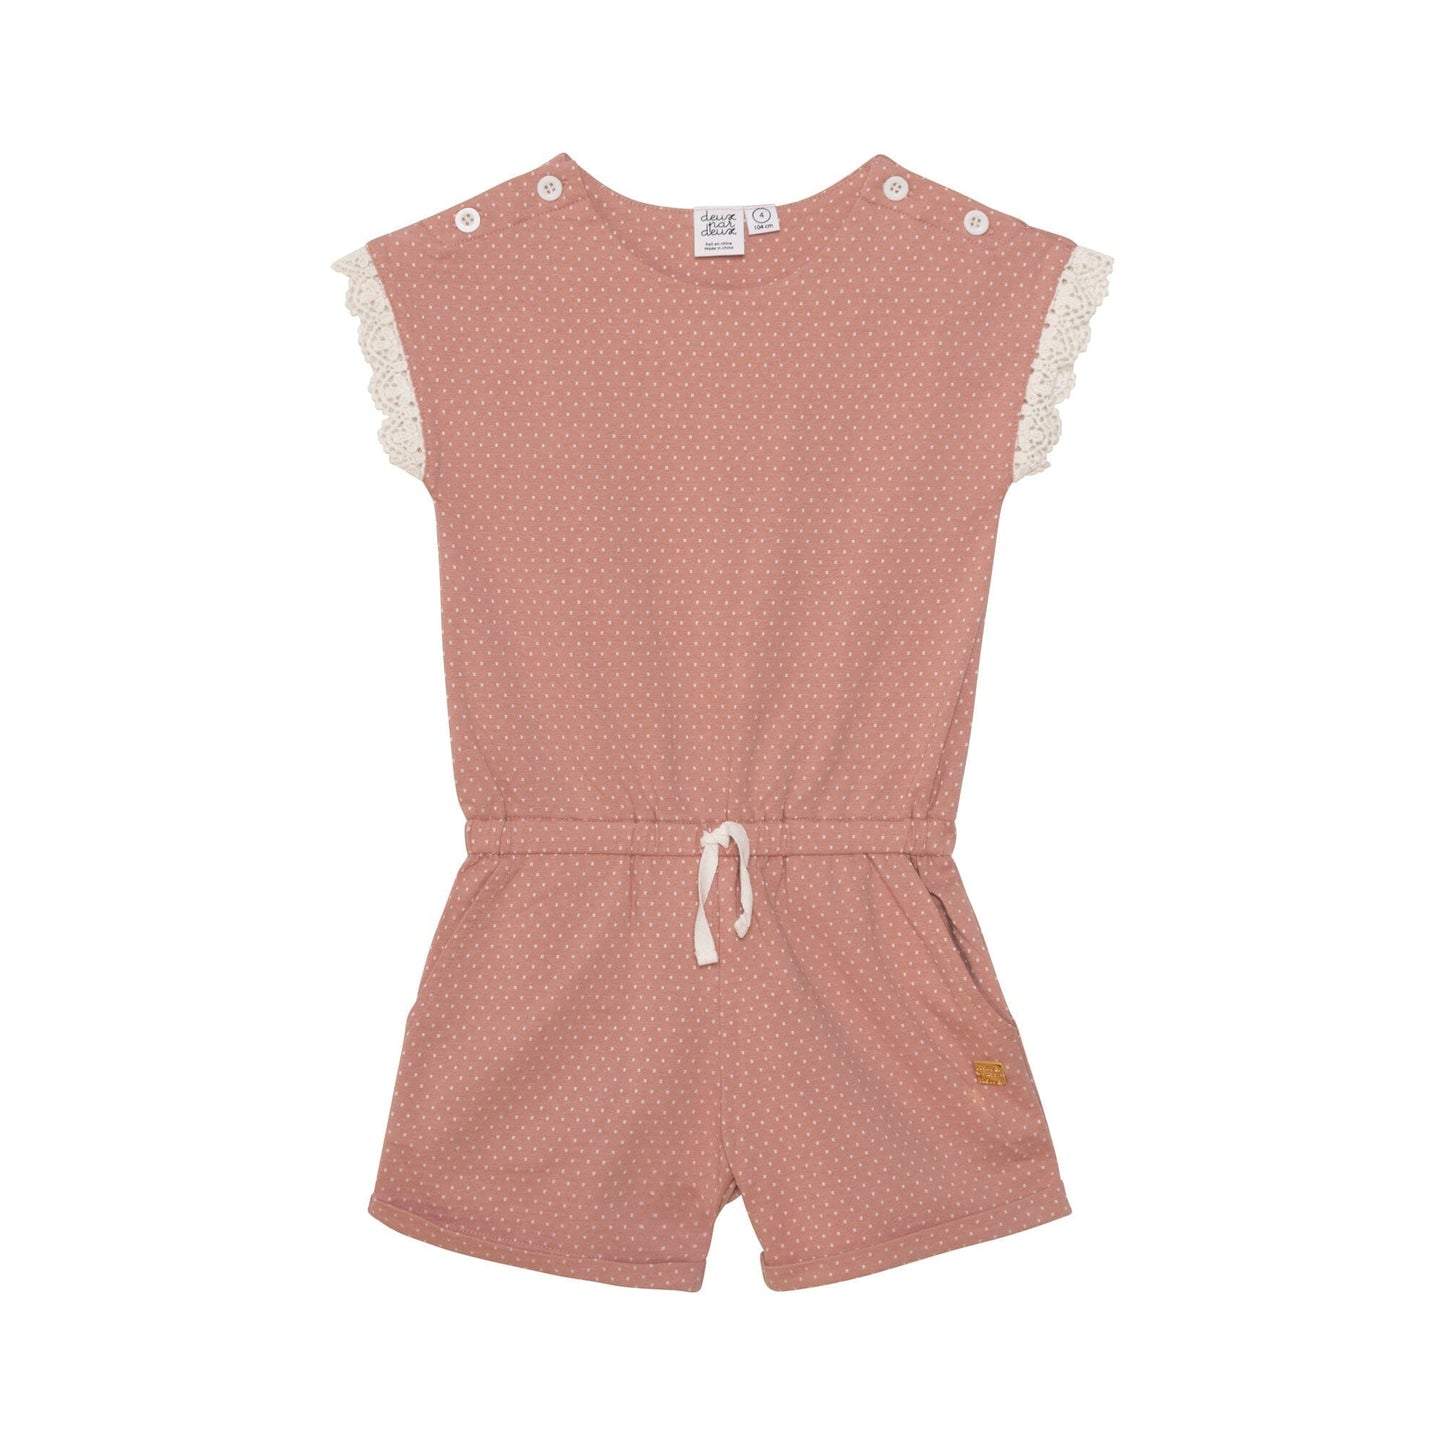 Printed Jumpsuit With Lace Dusty Pink Polka Dots - E30H41_000